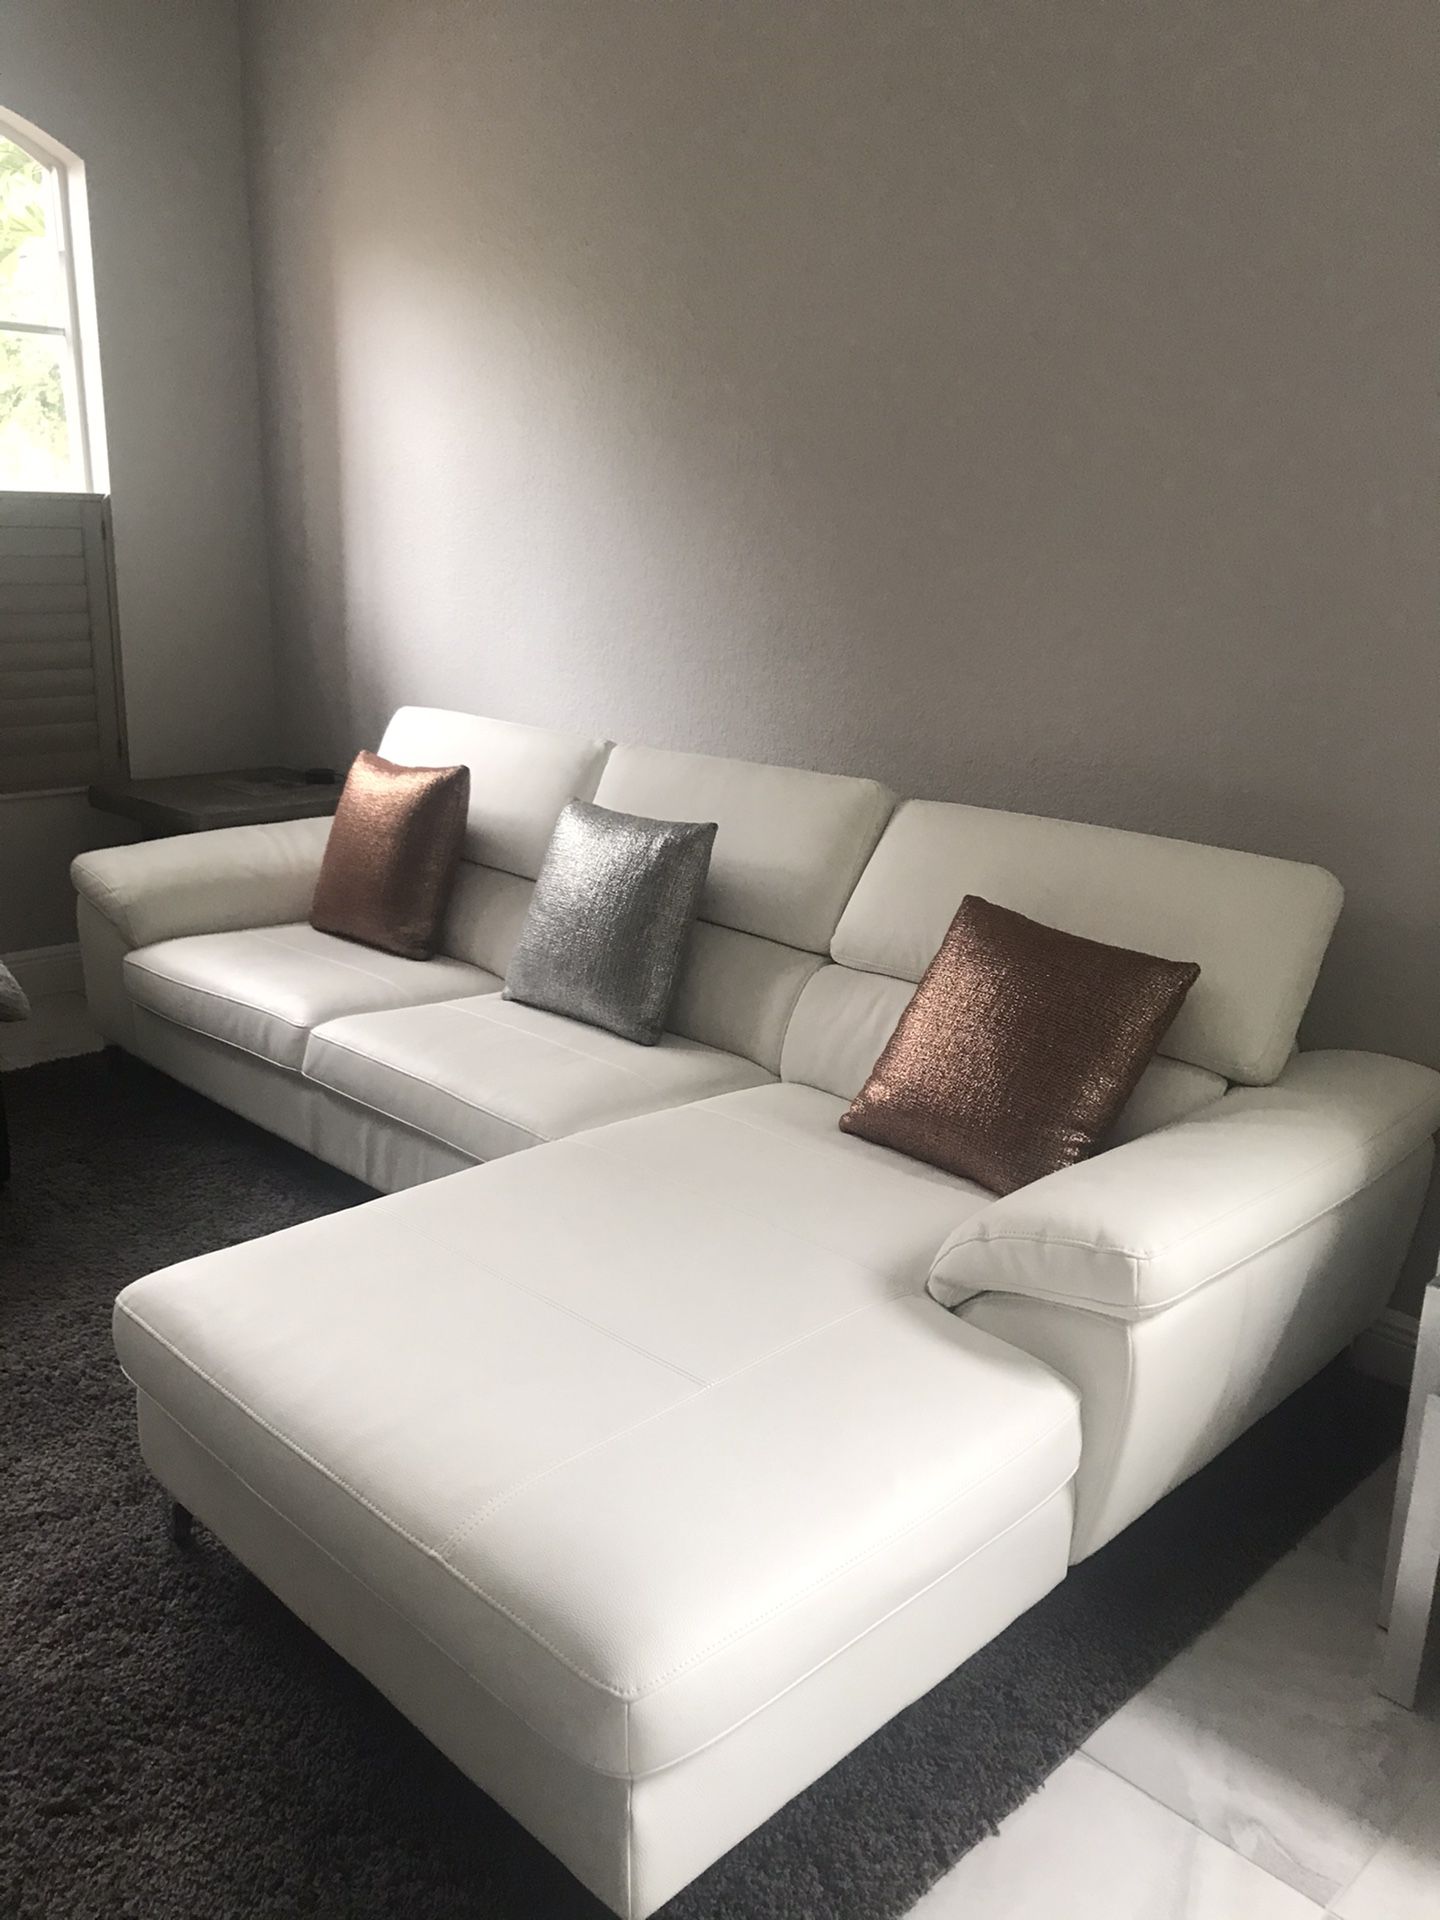 White leather sectional couch